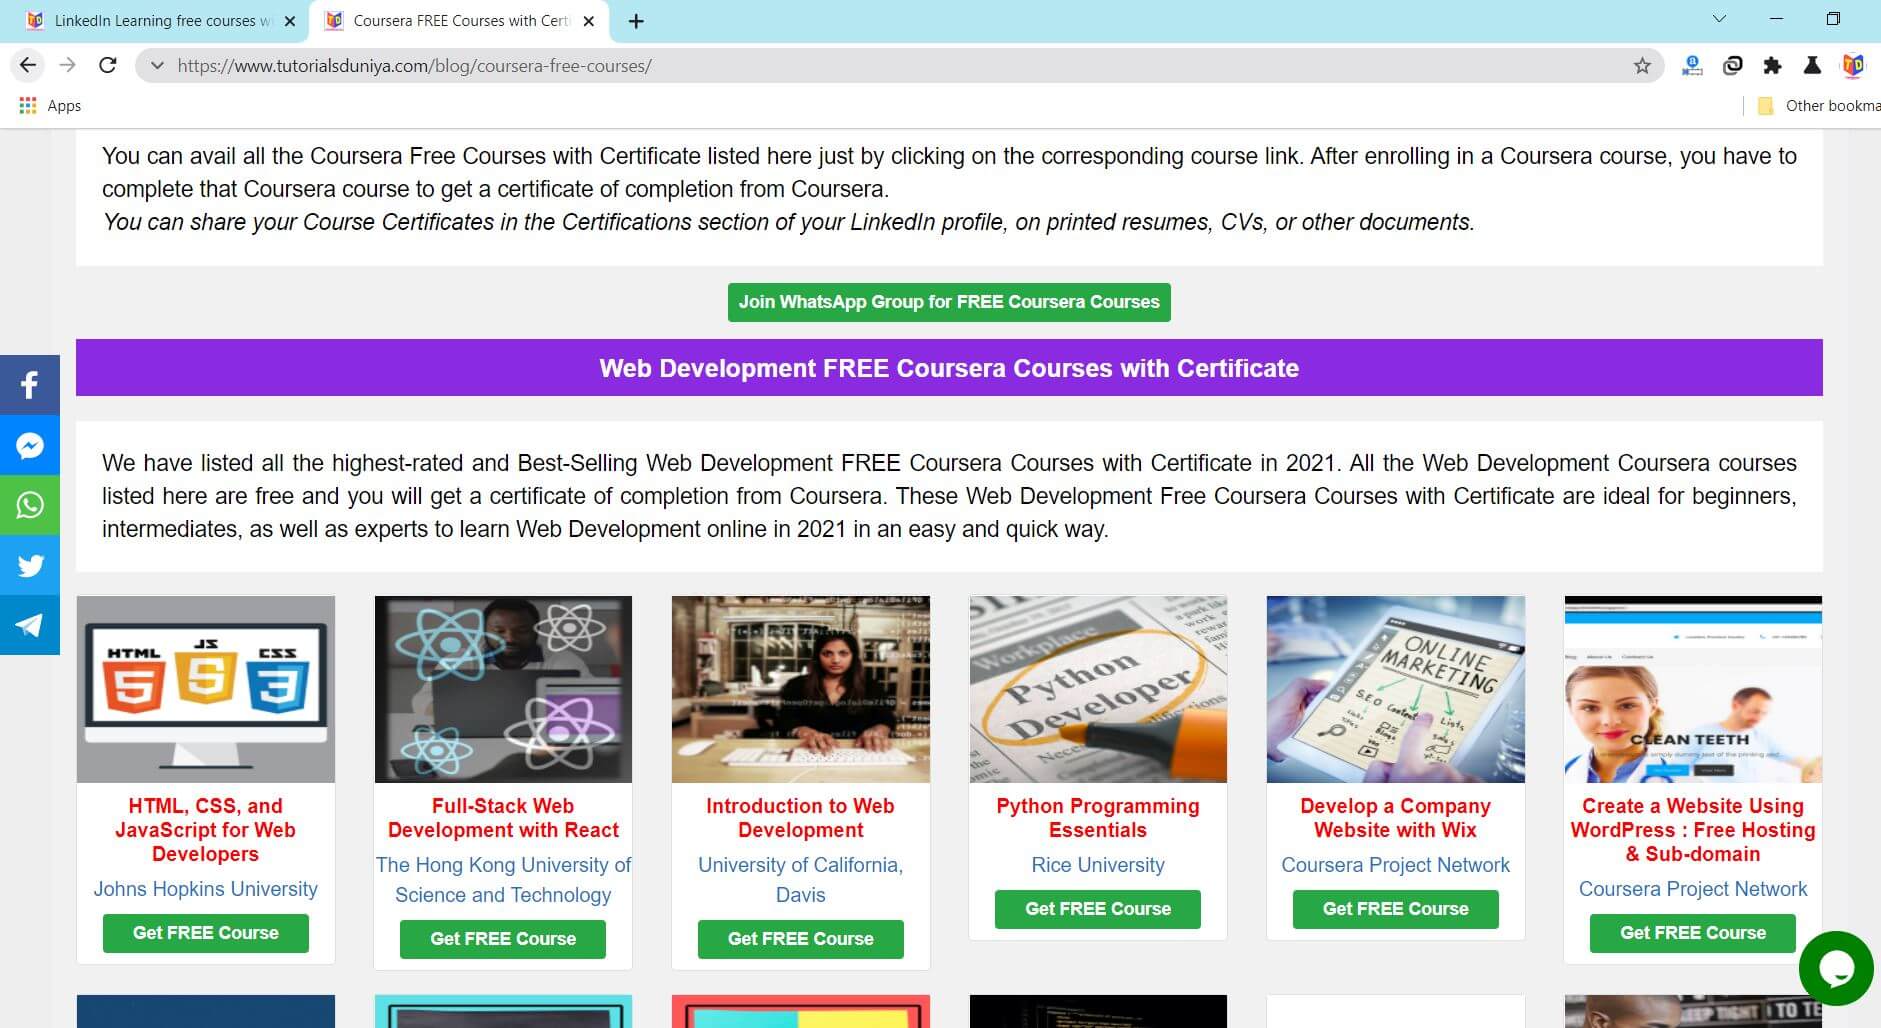 visit tutorialsduniya for coursera free courses with certificate